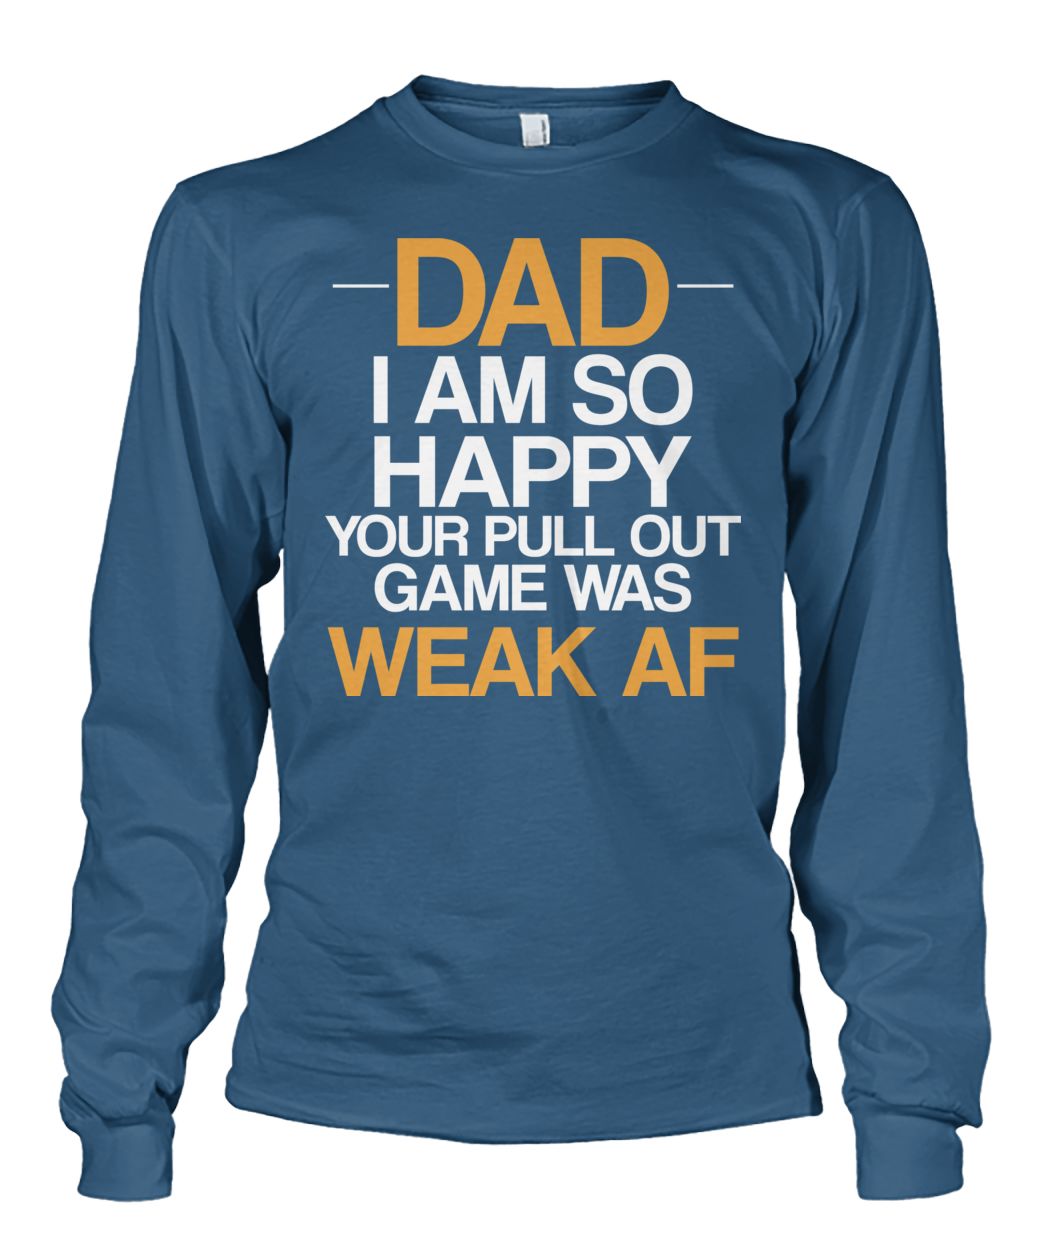 Dad I'm so happy your pull out game was weak af unisex long sleeve